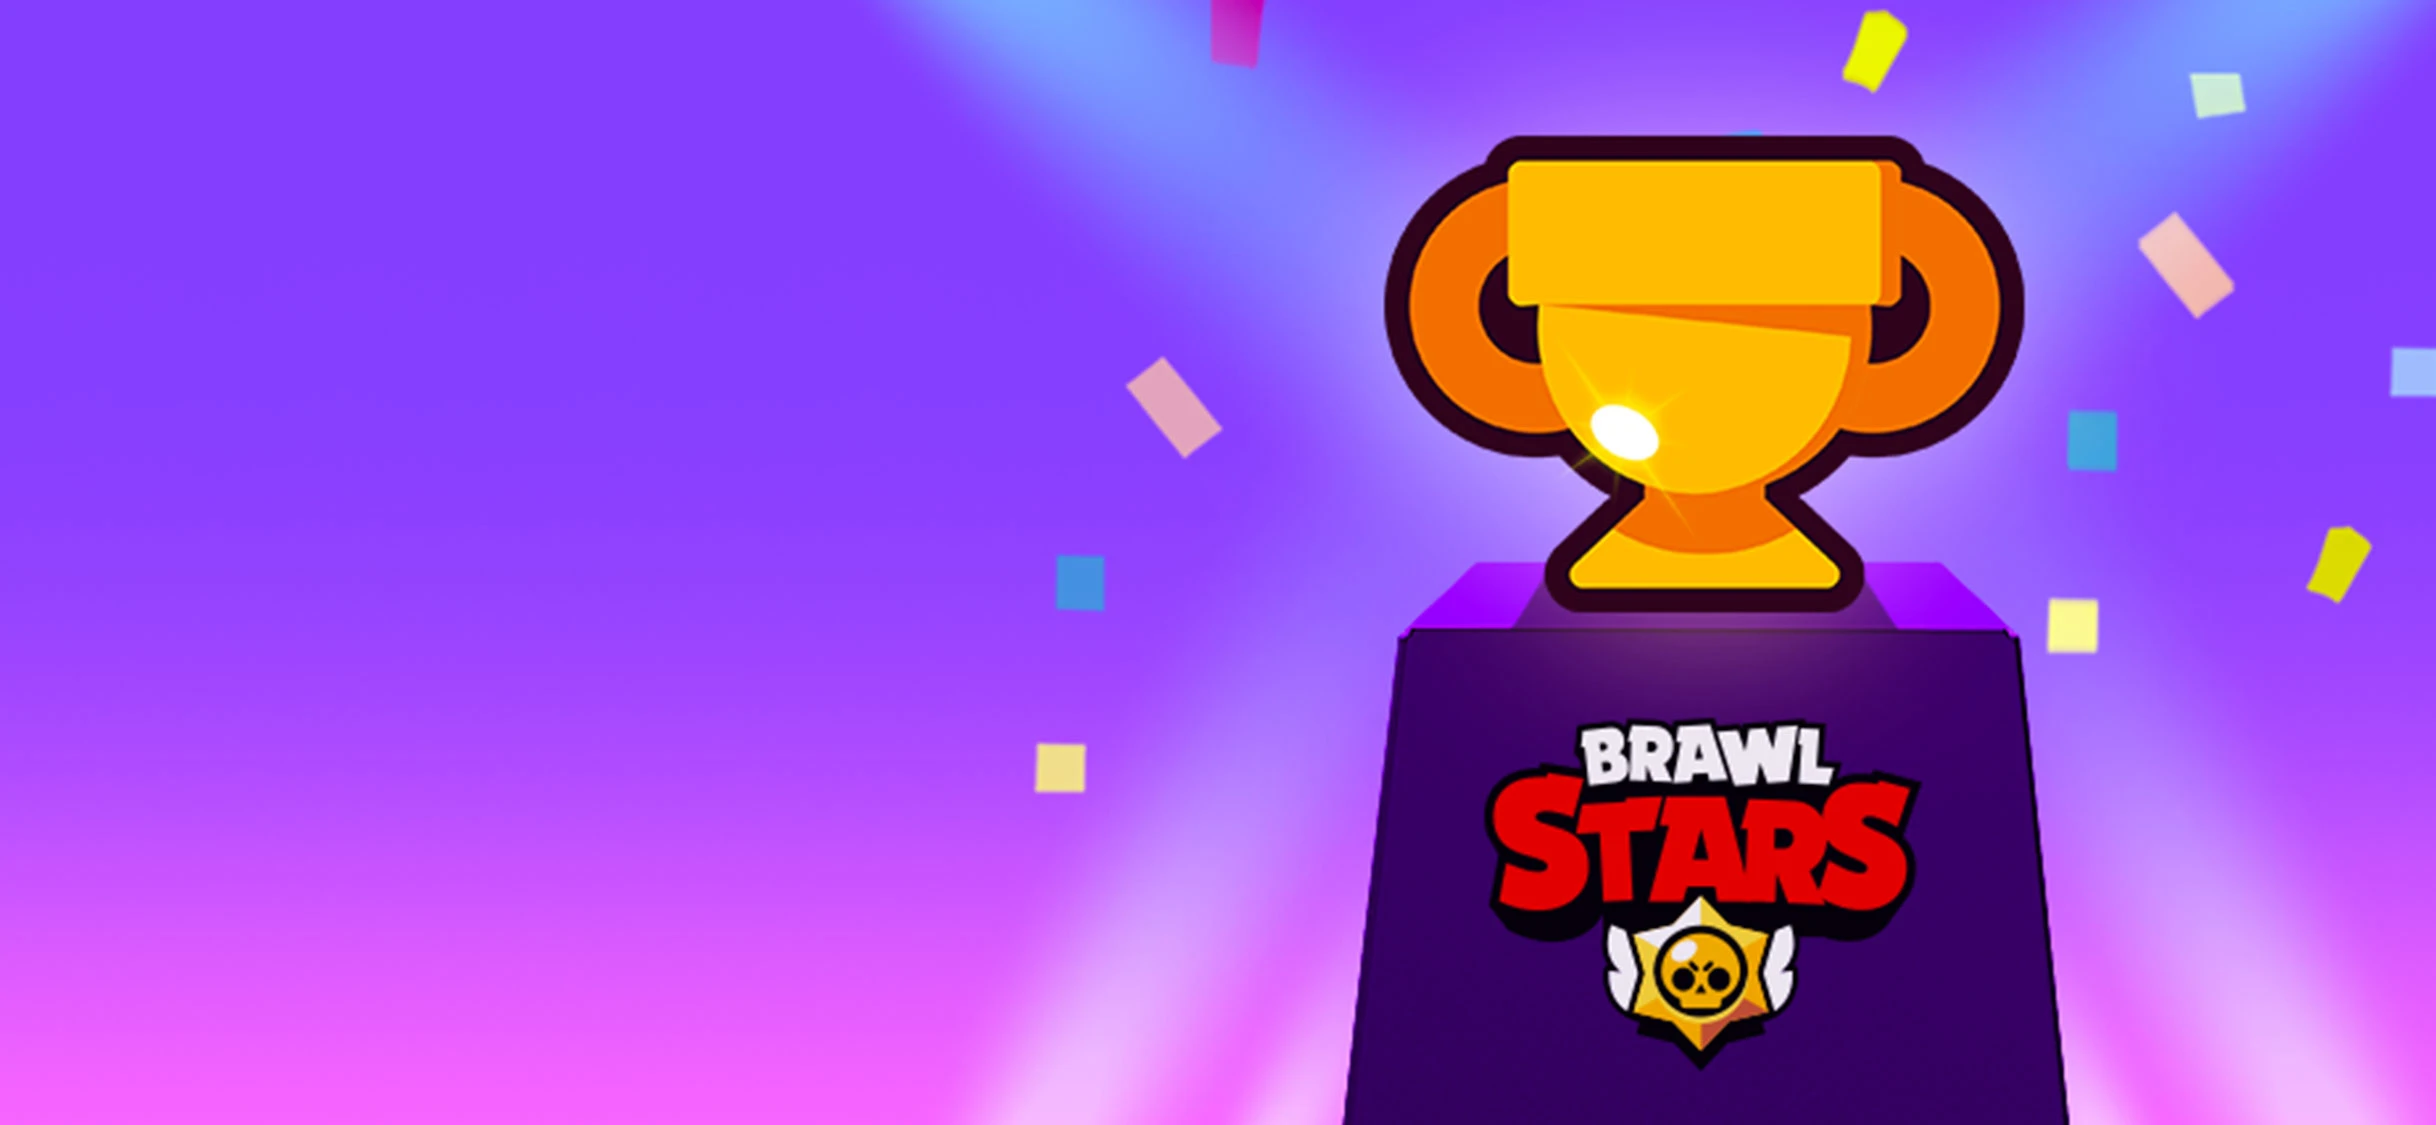 Brawl Stars announces winner of the Supercell MAKE campaign and awards  $2,500 to the victor